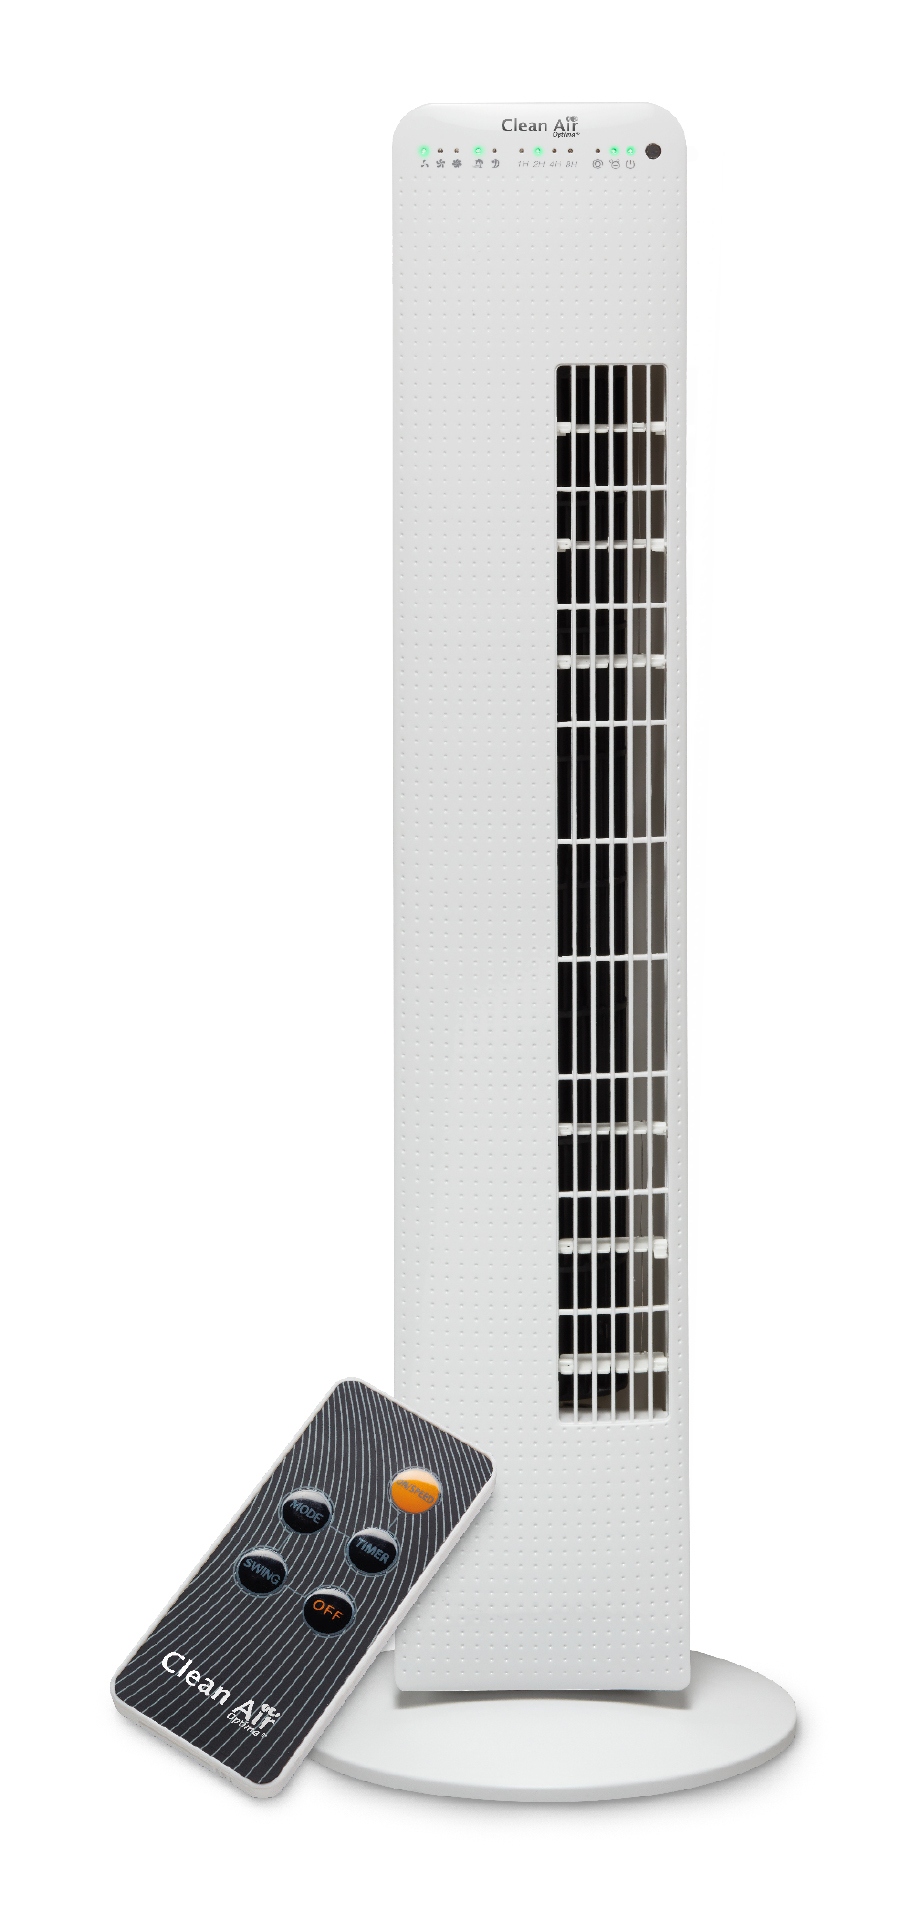 Luxery Tower Fan With Ionizer Ca 405 pertaining to size 923 X 1922